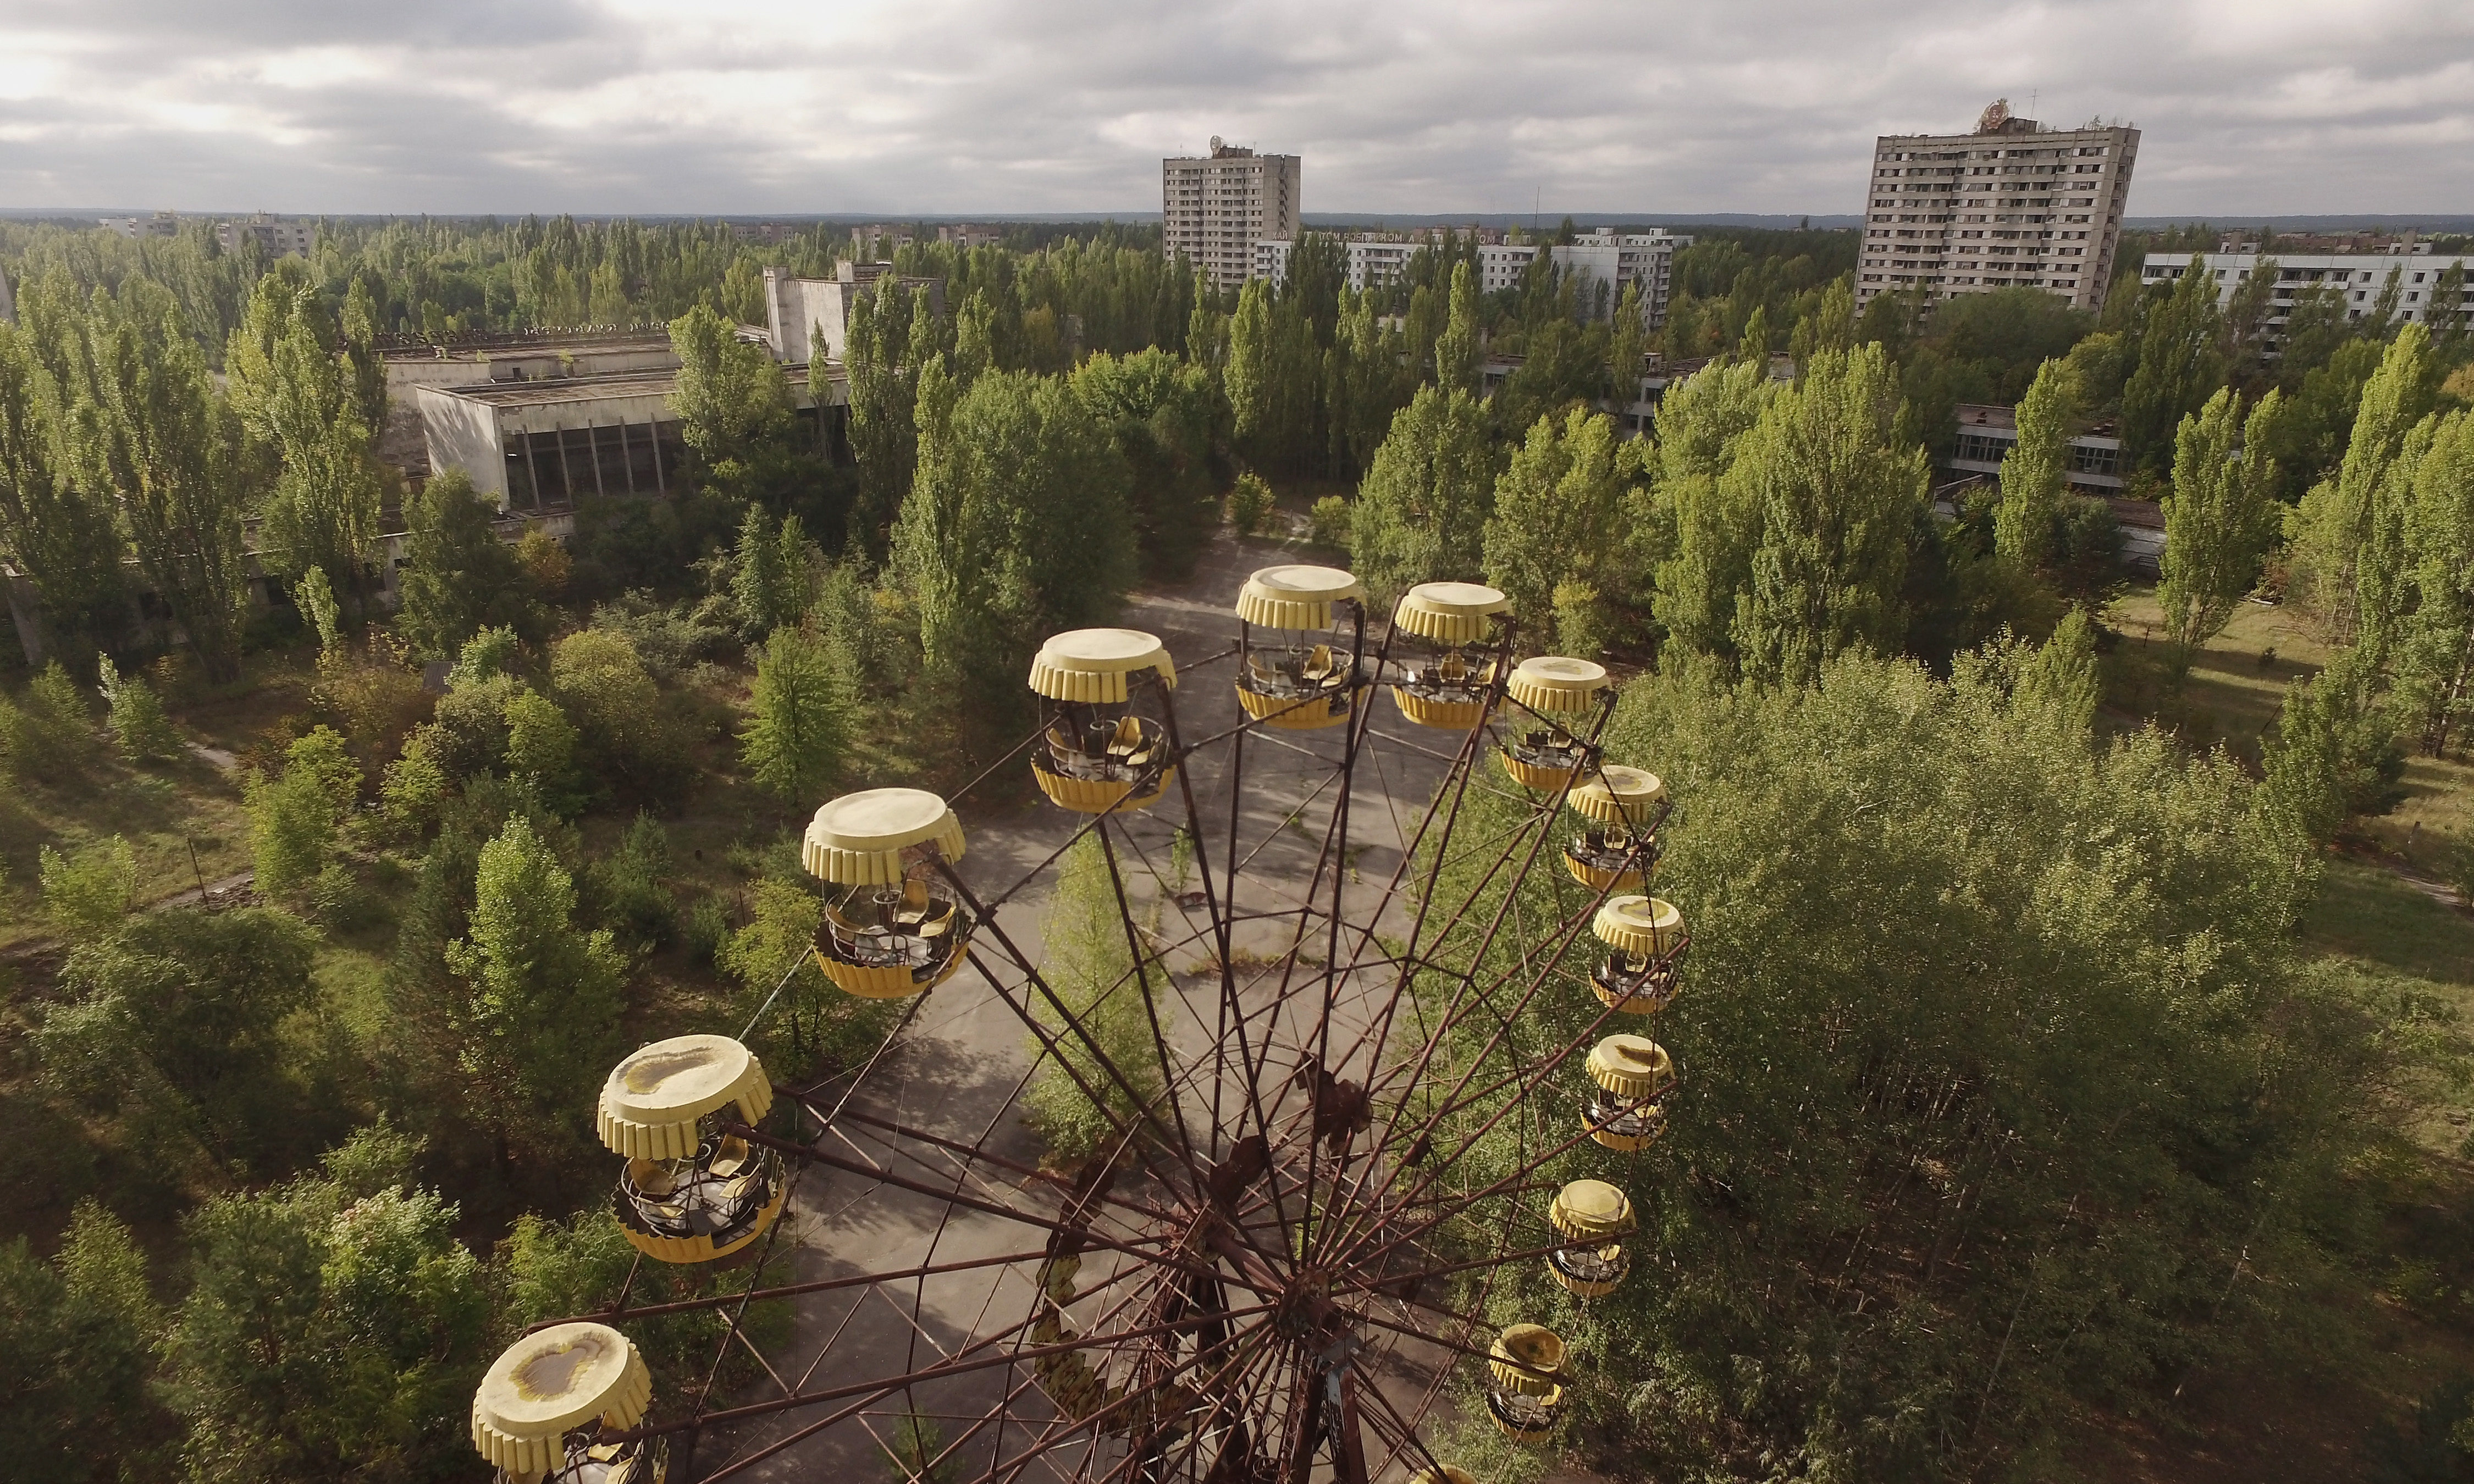 An abandoned ferris wheel stands on a public space overgrown with trees in Chernobyl.